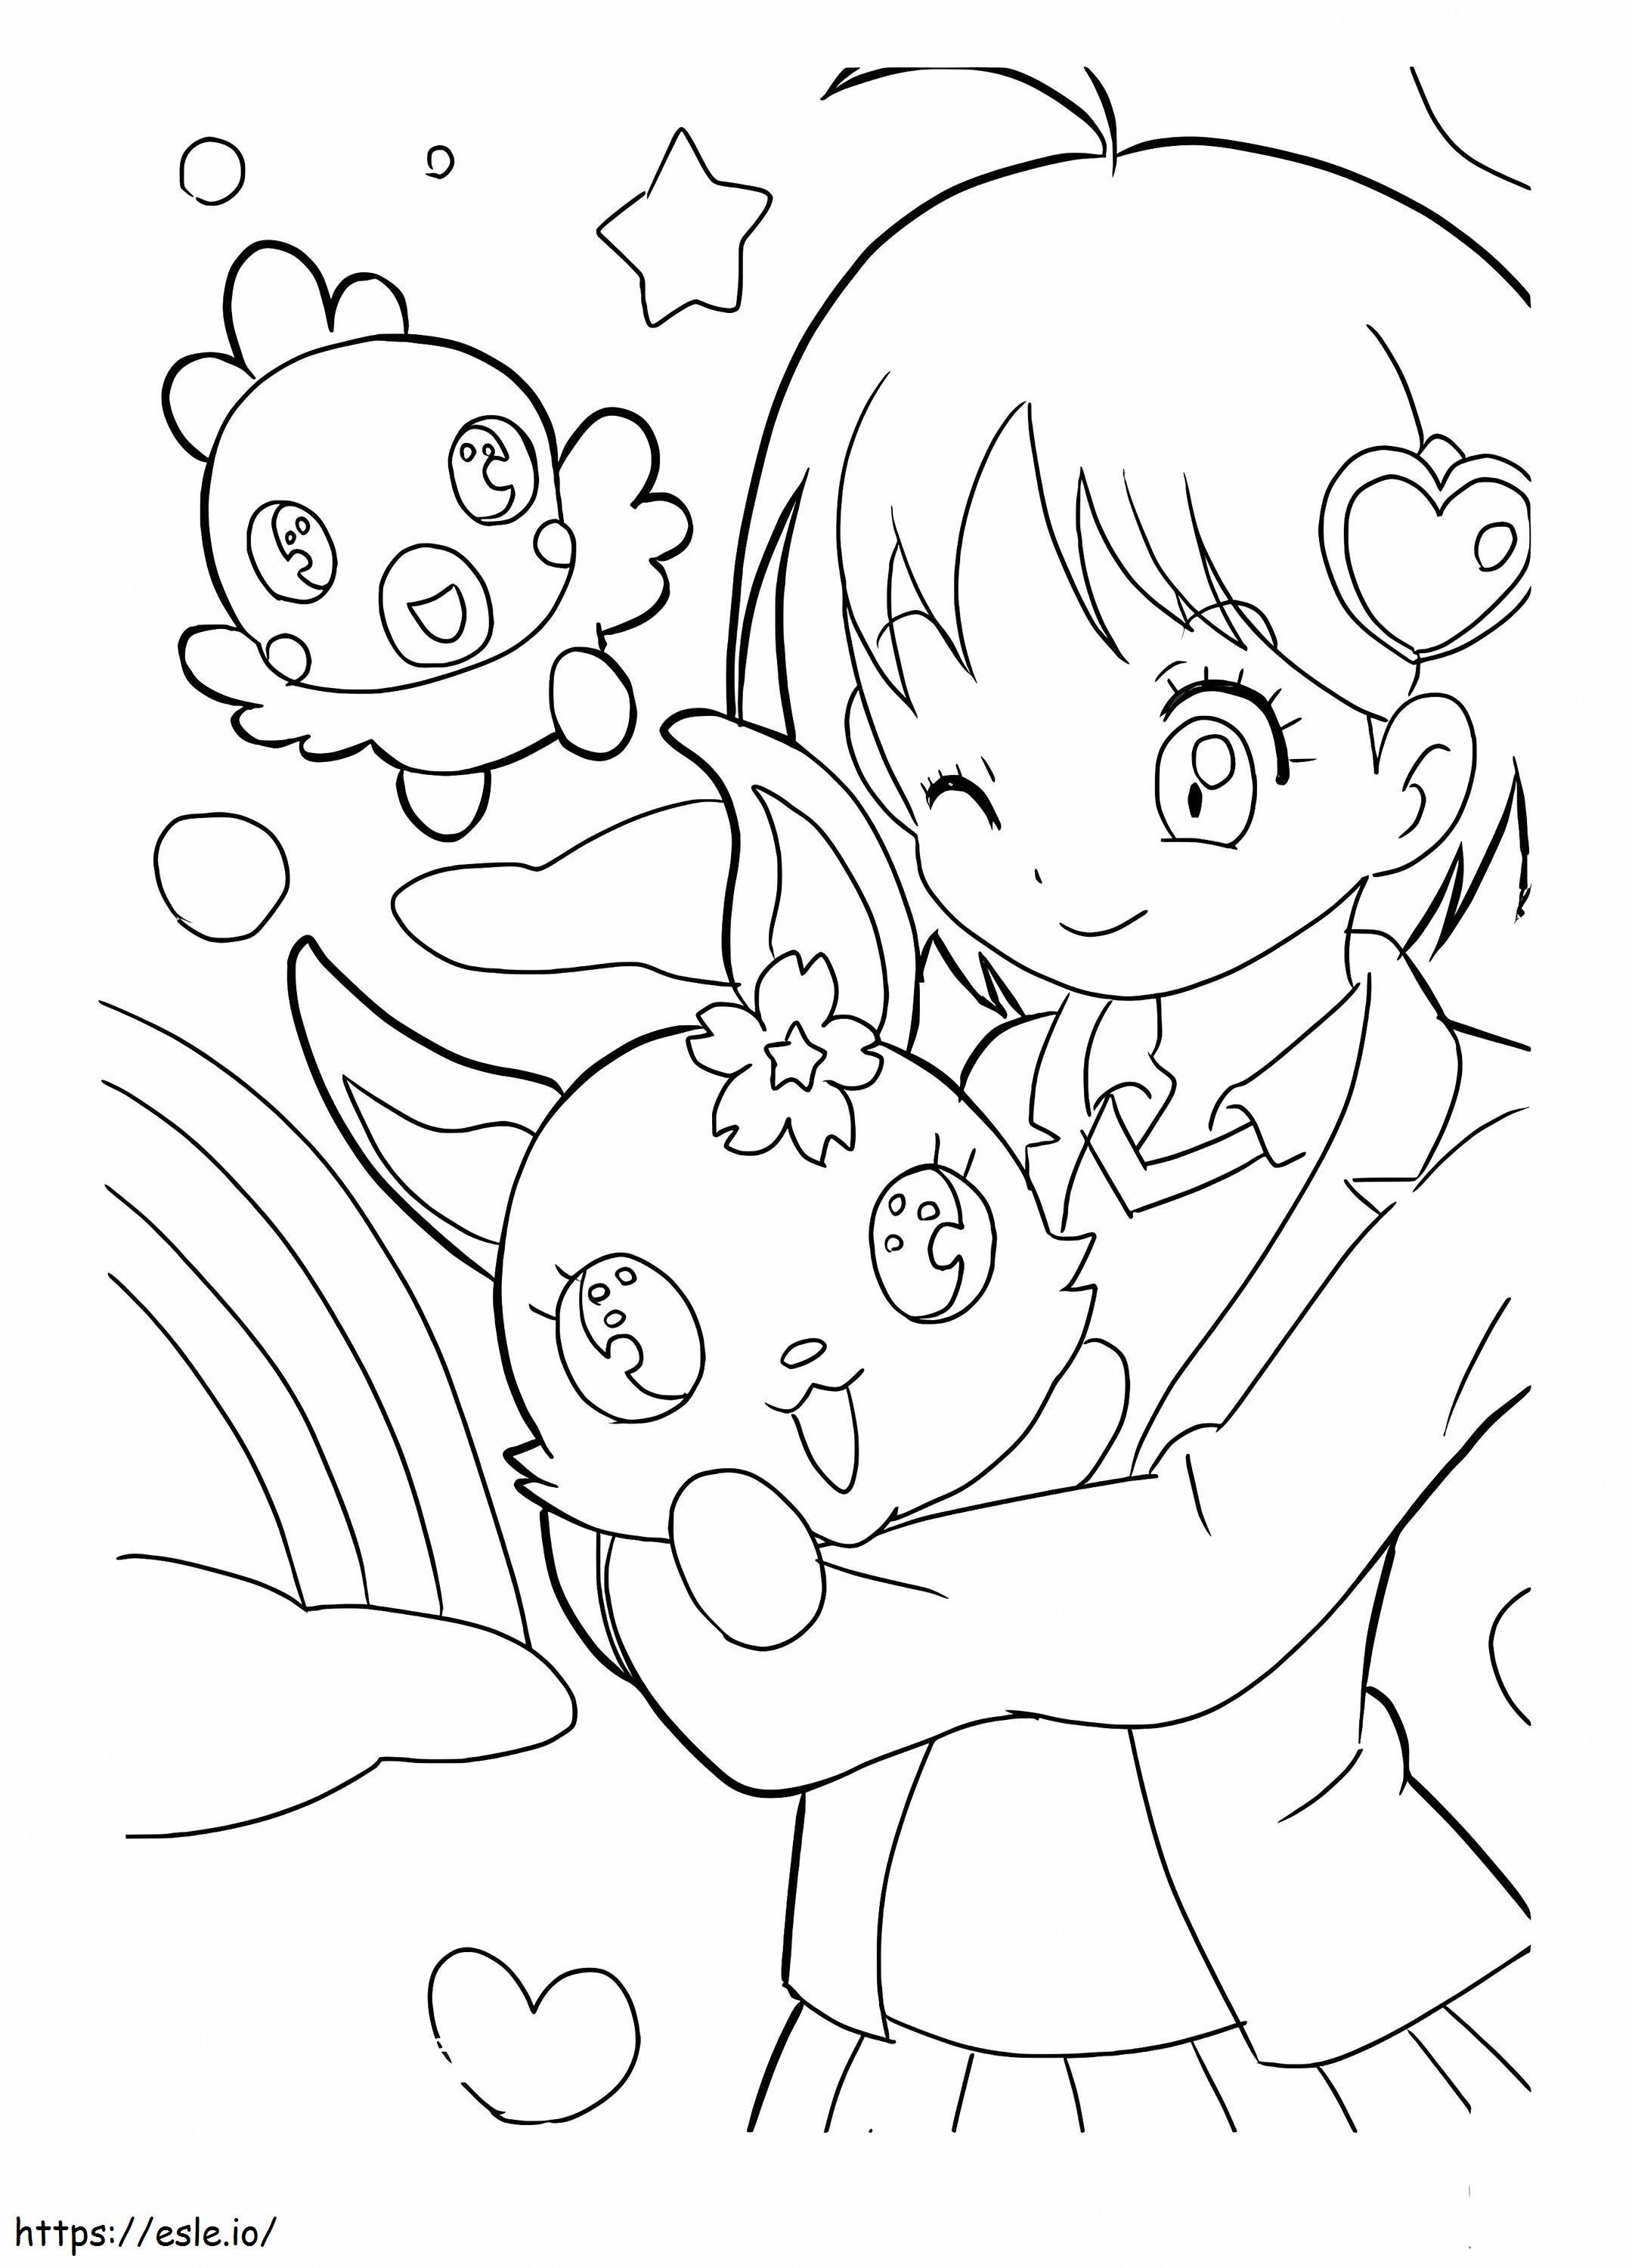 Jewelpets 4 coloring page